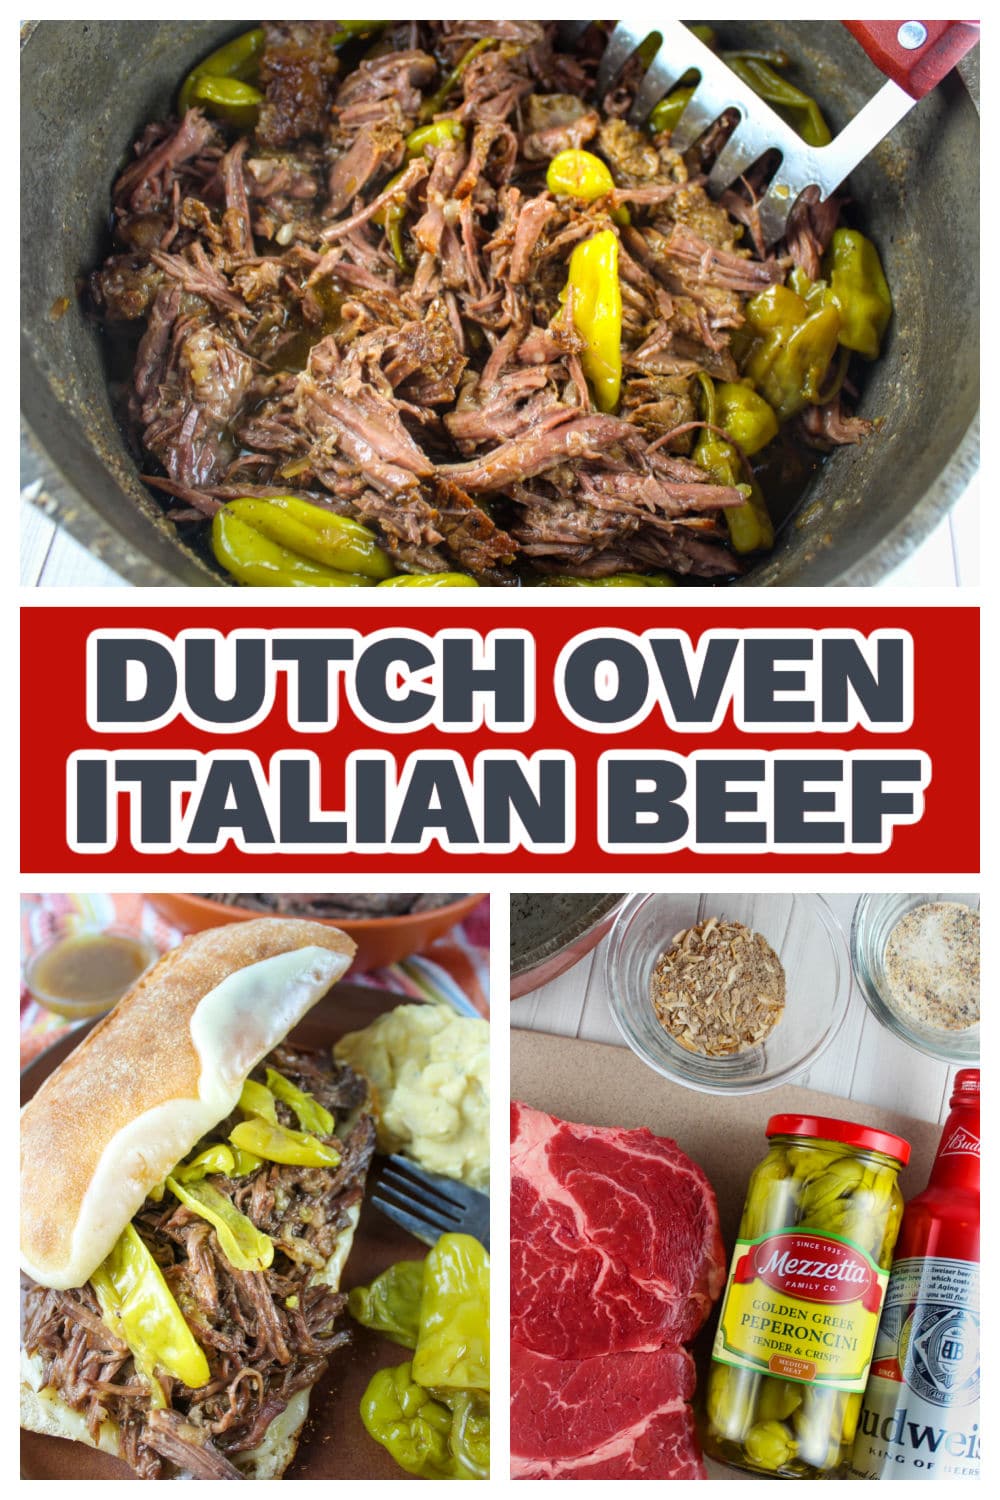 This Italian Beef recipe will make the most tender beef with so much flavor - you'll be making this at LEAST once a month! Plus - it's versatile - you can make sandwiches, pot roast or even beef and noodles with the meat! (This is perfect for game day - set it out with a bunch of slider buns and sliced cheese for make your own sandwiches!) via @foodhussy